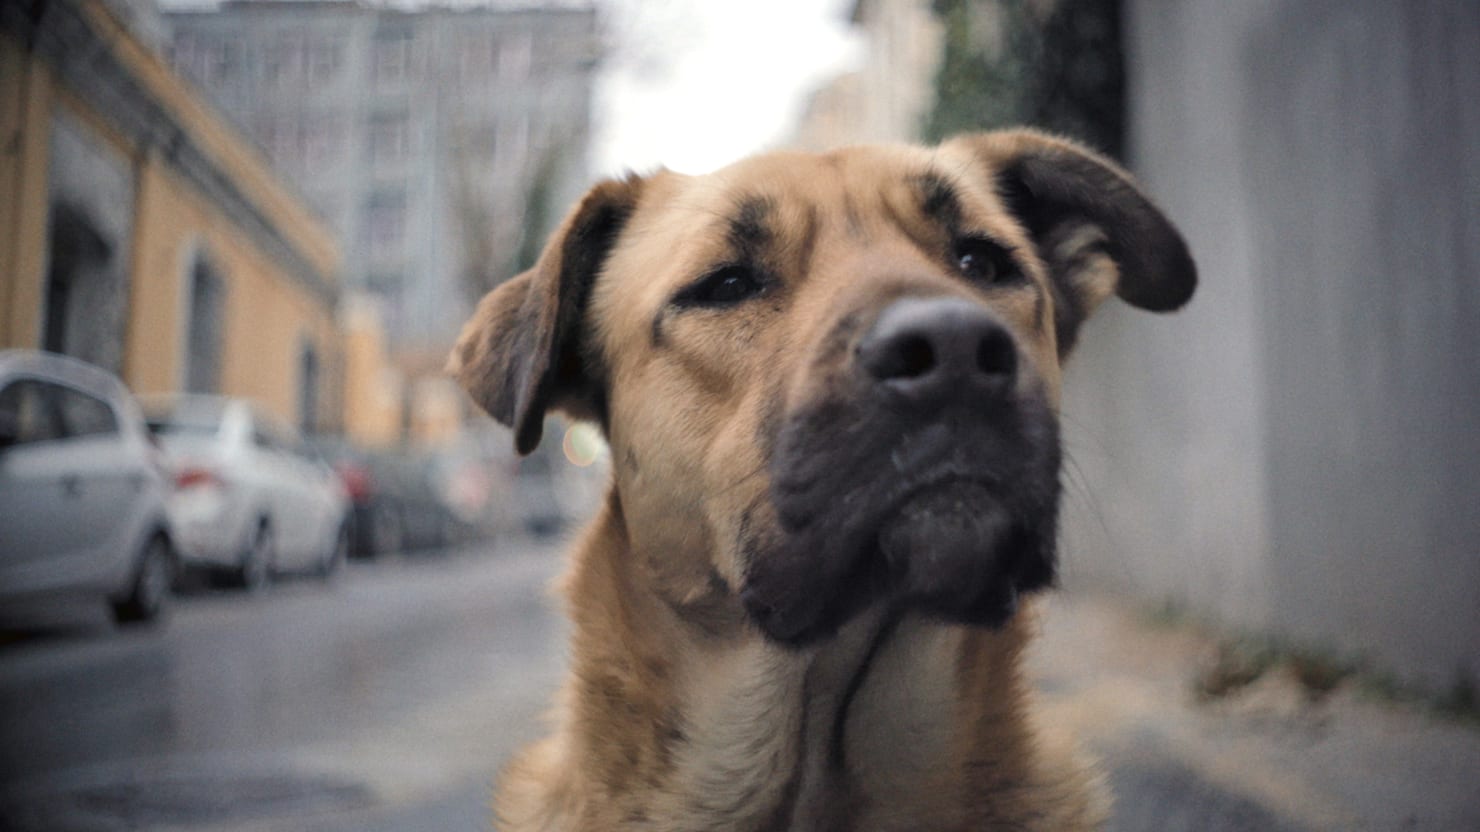 The city filled with homeless dogs fighting to survive